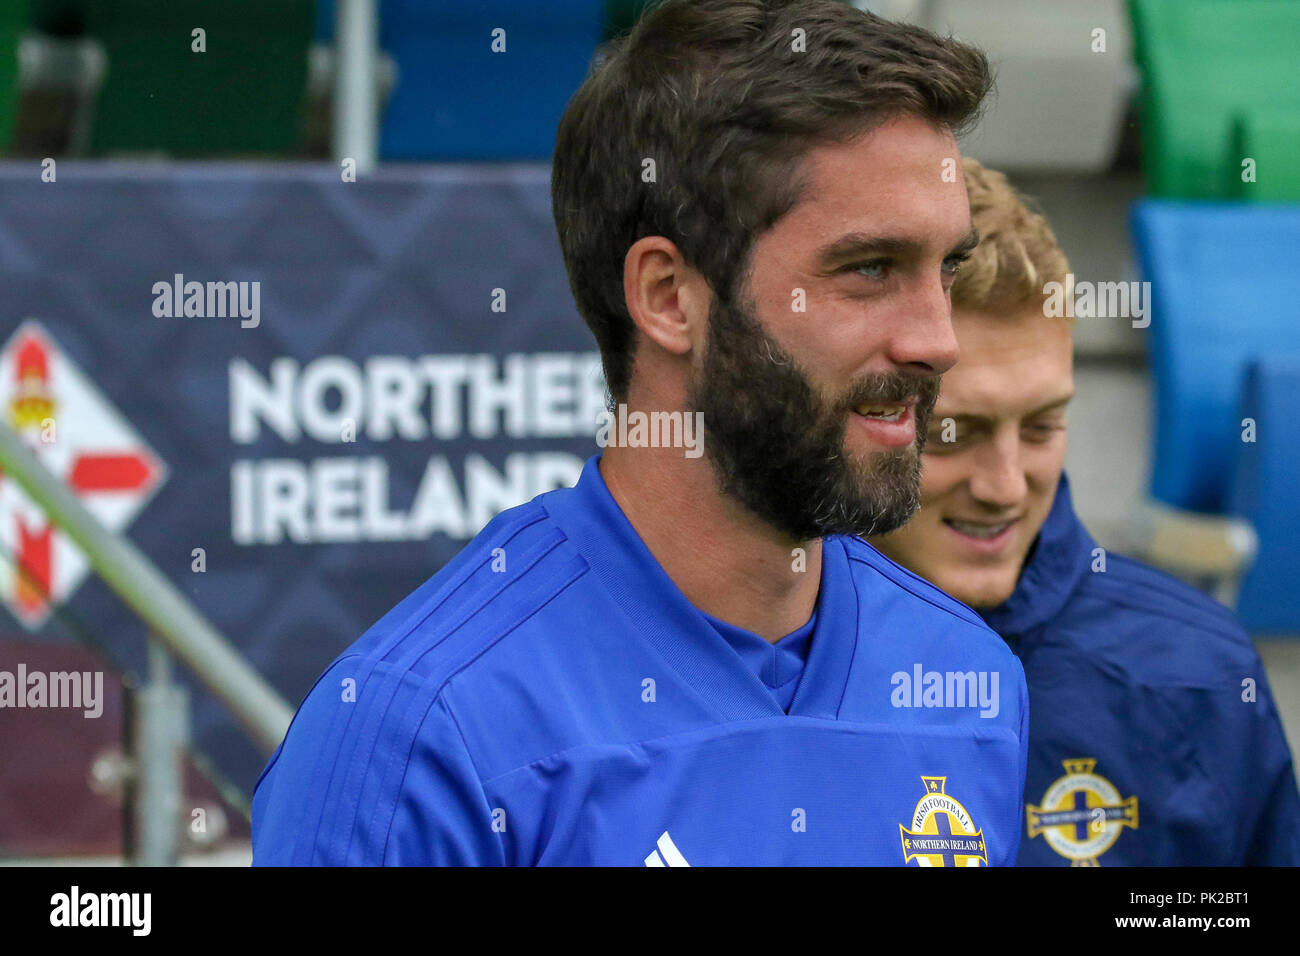 Windsor Park, Belfast, Northern Ireland. 10 September 2018. After Saturday's defeat in the UEFA Nations League, Northern Ireland returned to training this morning at Windsor Park. Tomorrow night they play Israel in a friendly international. Will Grigg at training. Credit: David Hunter/Alamy Live News. Stock Photo